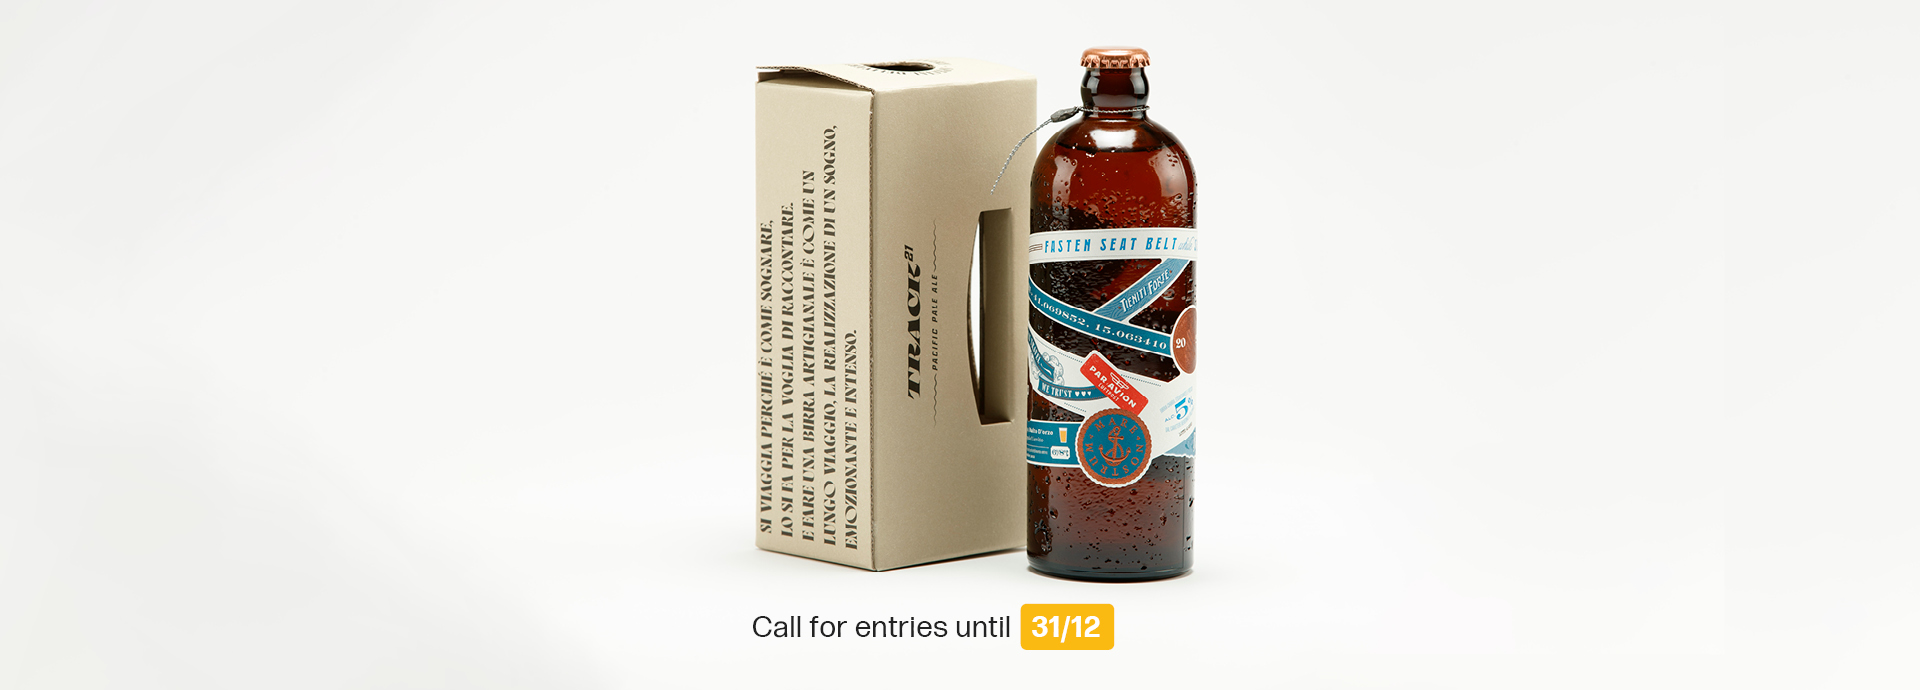 The New Best Beer Label and Pack Award edition is here!